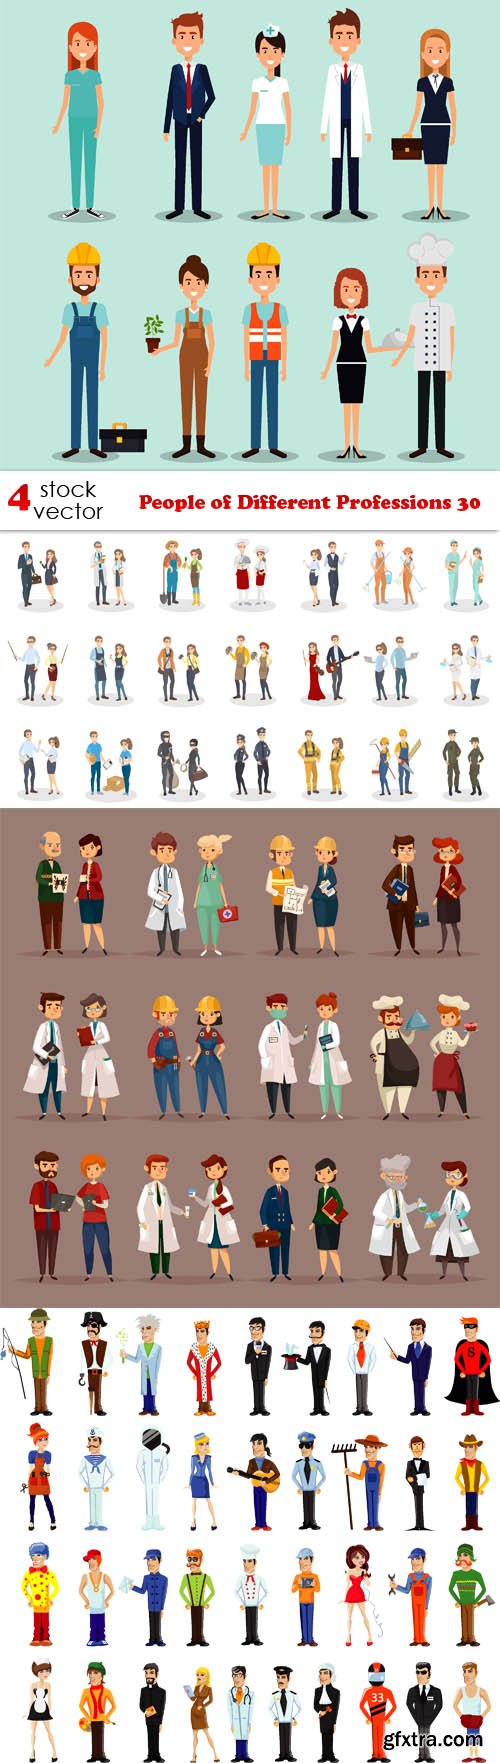 Vectors - People of Different Professions 30